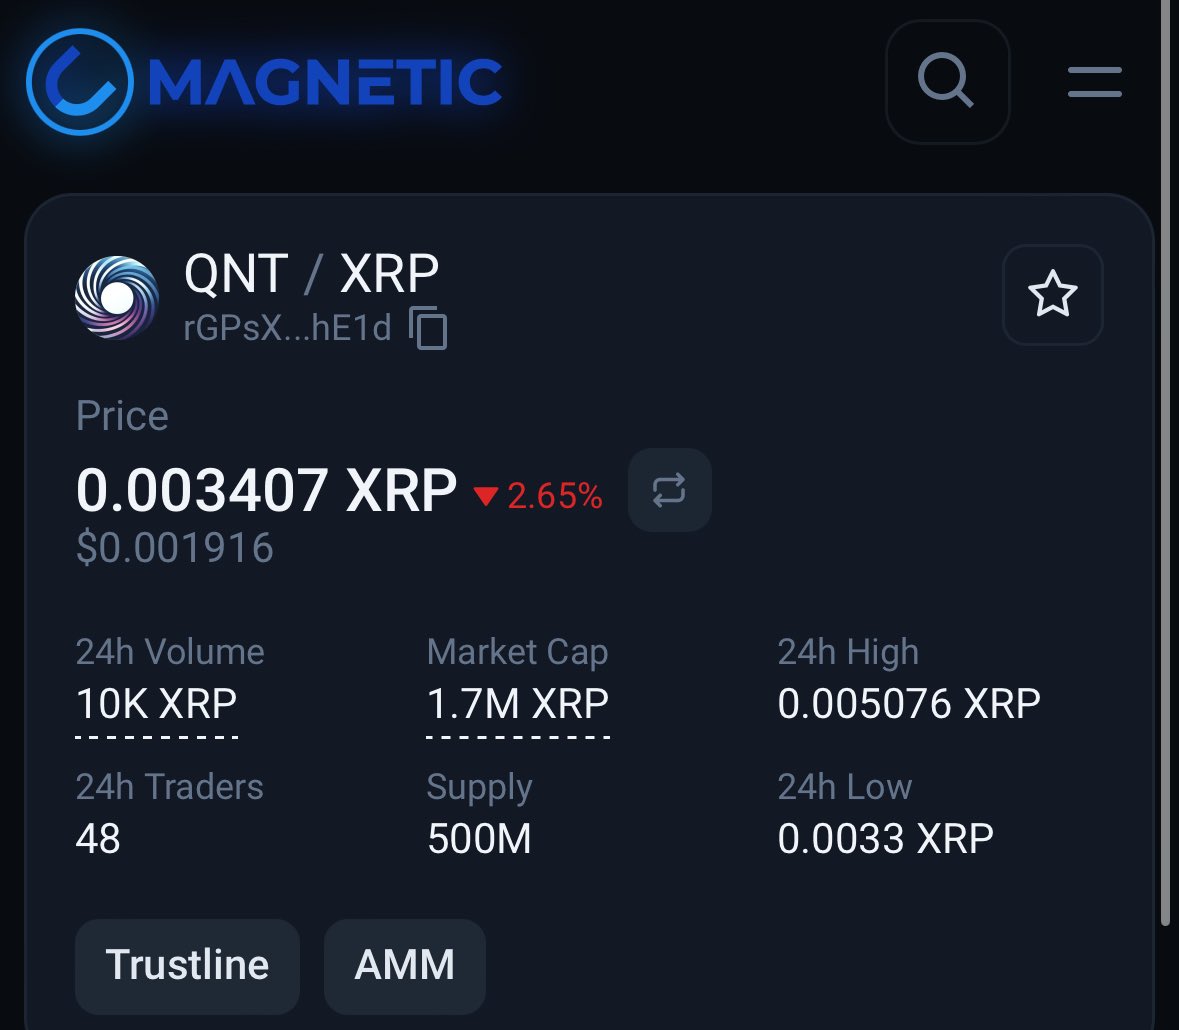 🚨6 DAYS TO GO! $QNT PRESALE IS CLOSING! MAXIMIZE YOUR GAINS WITH OUR BUYBACKS 🔥 1.7M XRP MC ⚡️ ➡️ BUY HERE: sologenic.org/trade?network=… ➡️ OR HERE: xmagnetic.org/dex/QNT+rGPsXn… ➡️ TELEGRAM: t.me/quantumxrpl 69M LEFT 🚀 | #XRP #XRPL